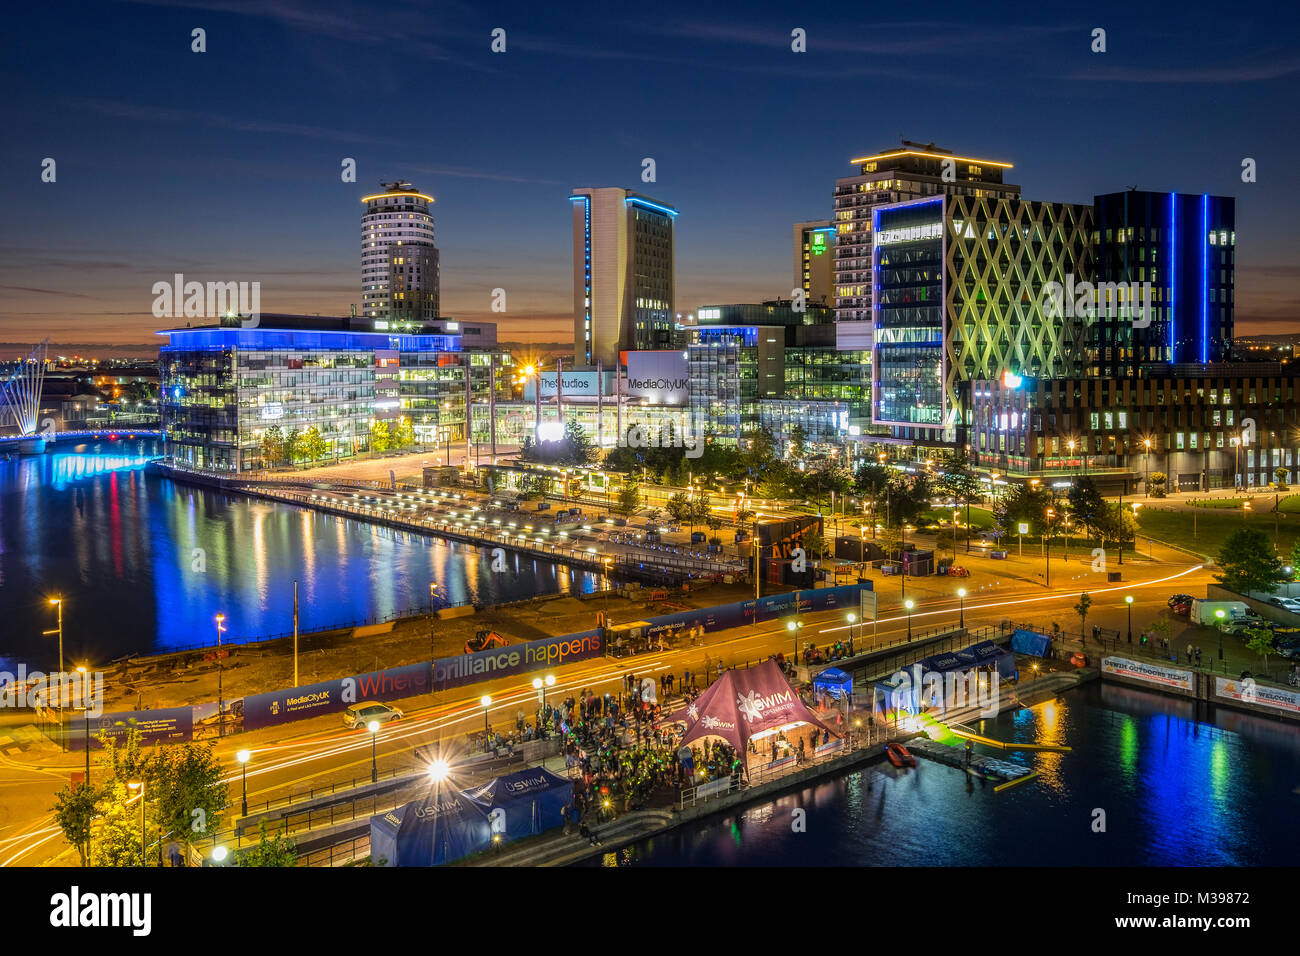 MediaCityUK de nuit, Salford Quays, Greater Manchester, Angleterre, Royaume-Uni Banque D'Images